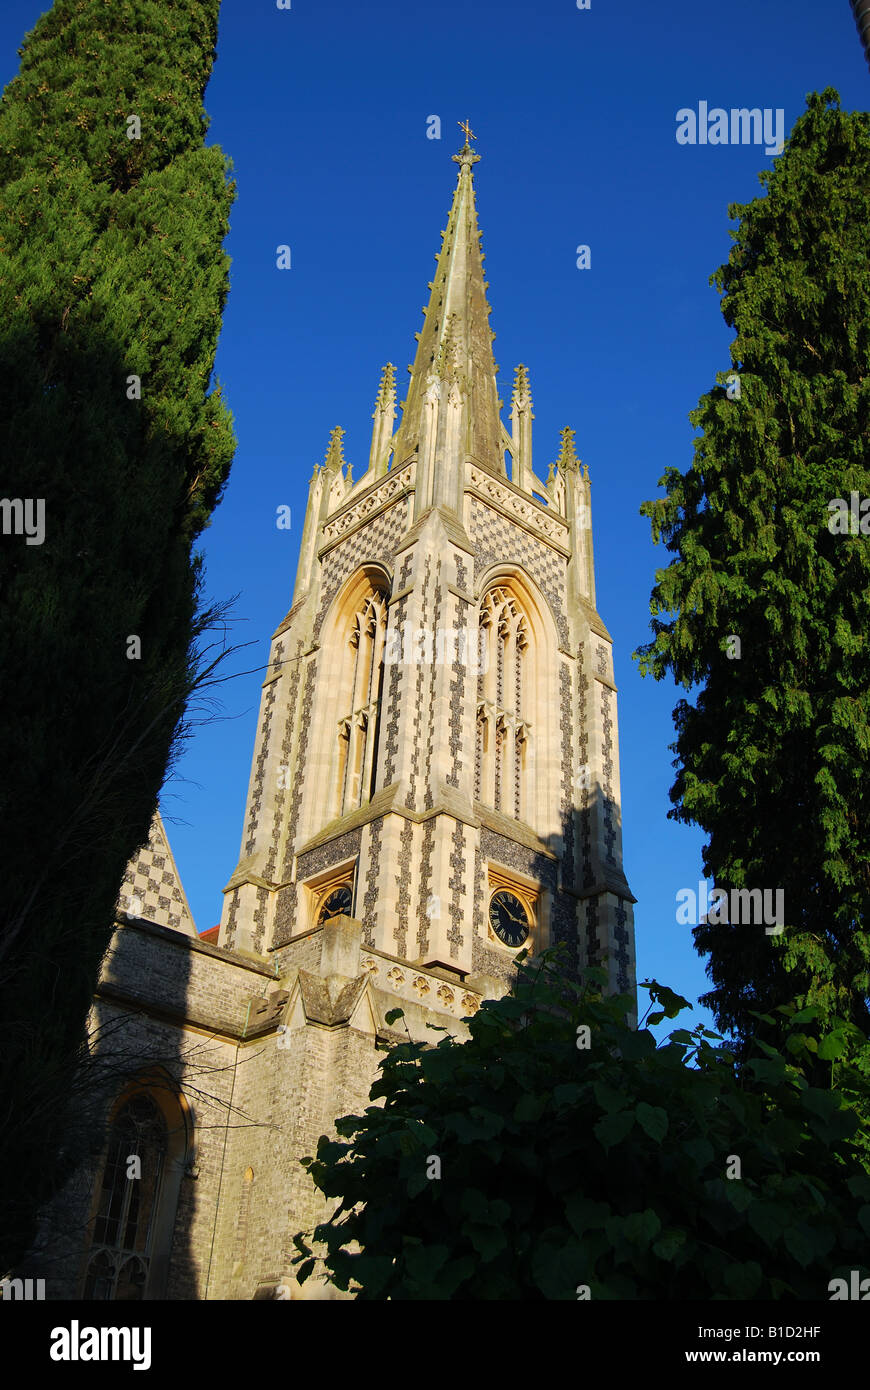 All Saints Church, Marlow, Buckinghamshire, Angleterre, Royaume-Uni Banque D'Images